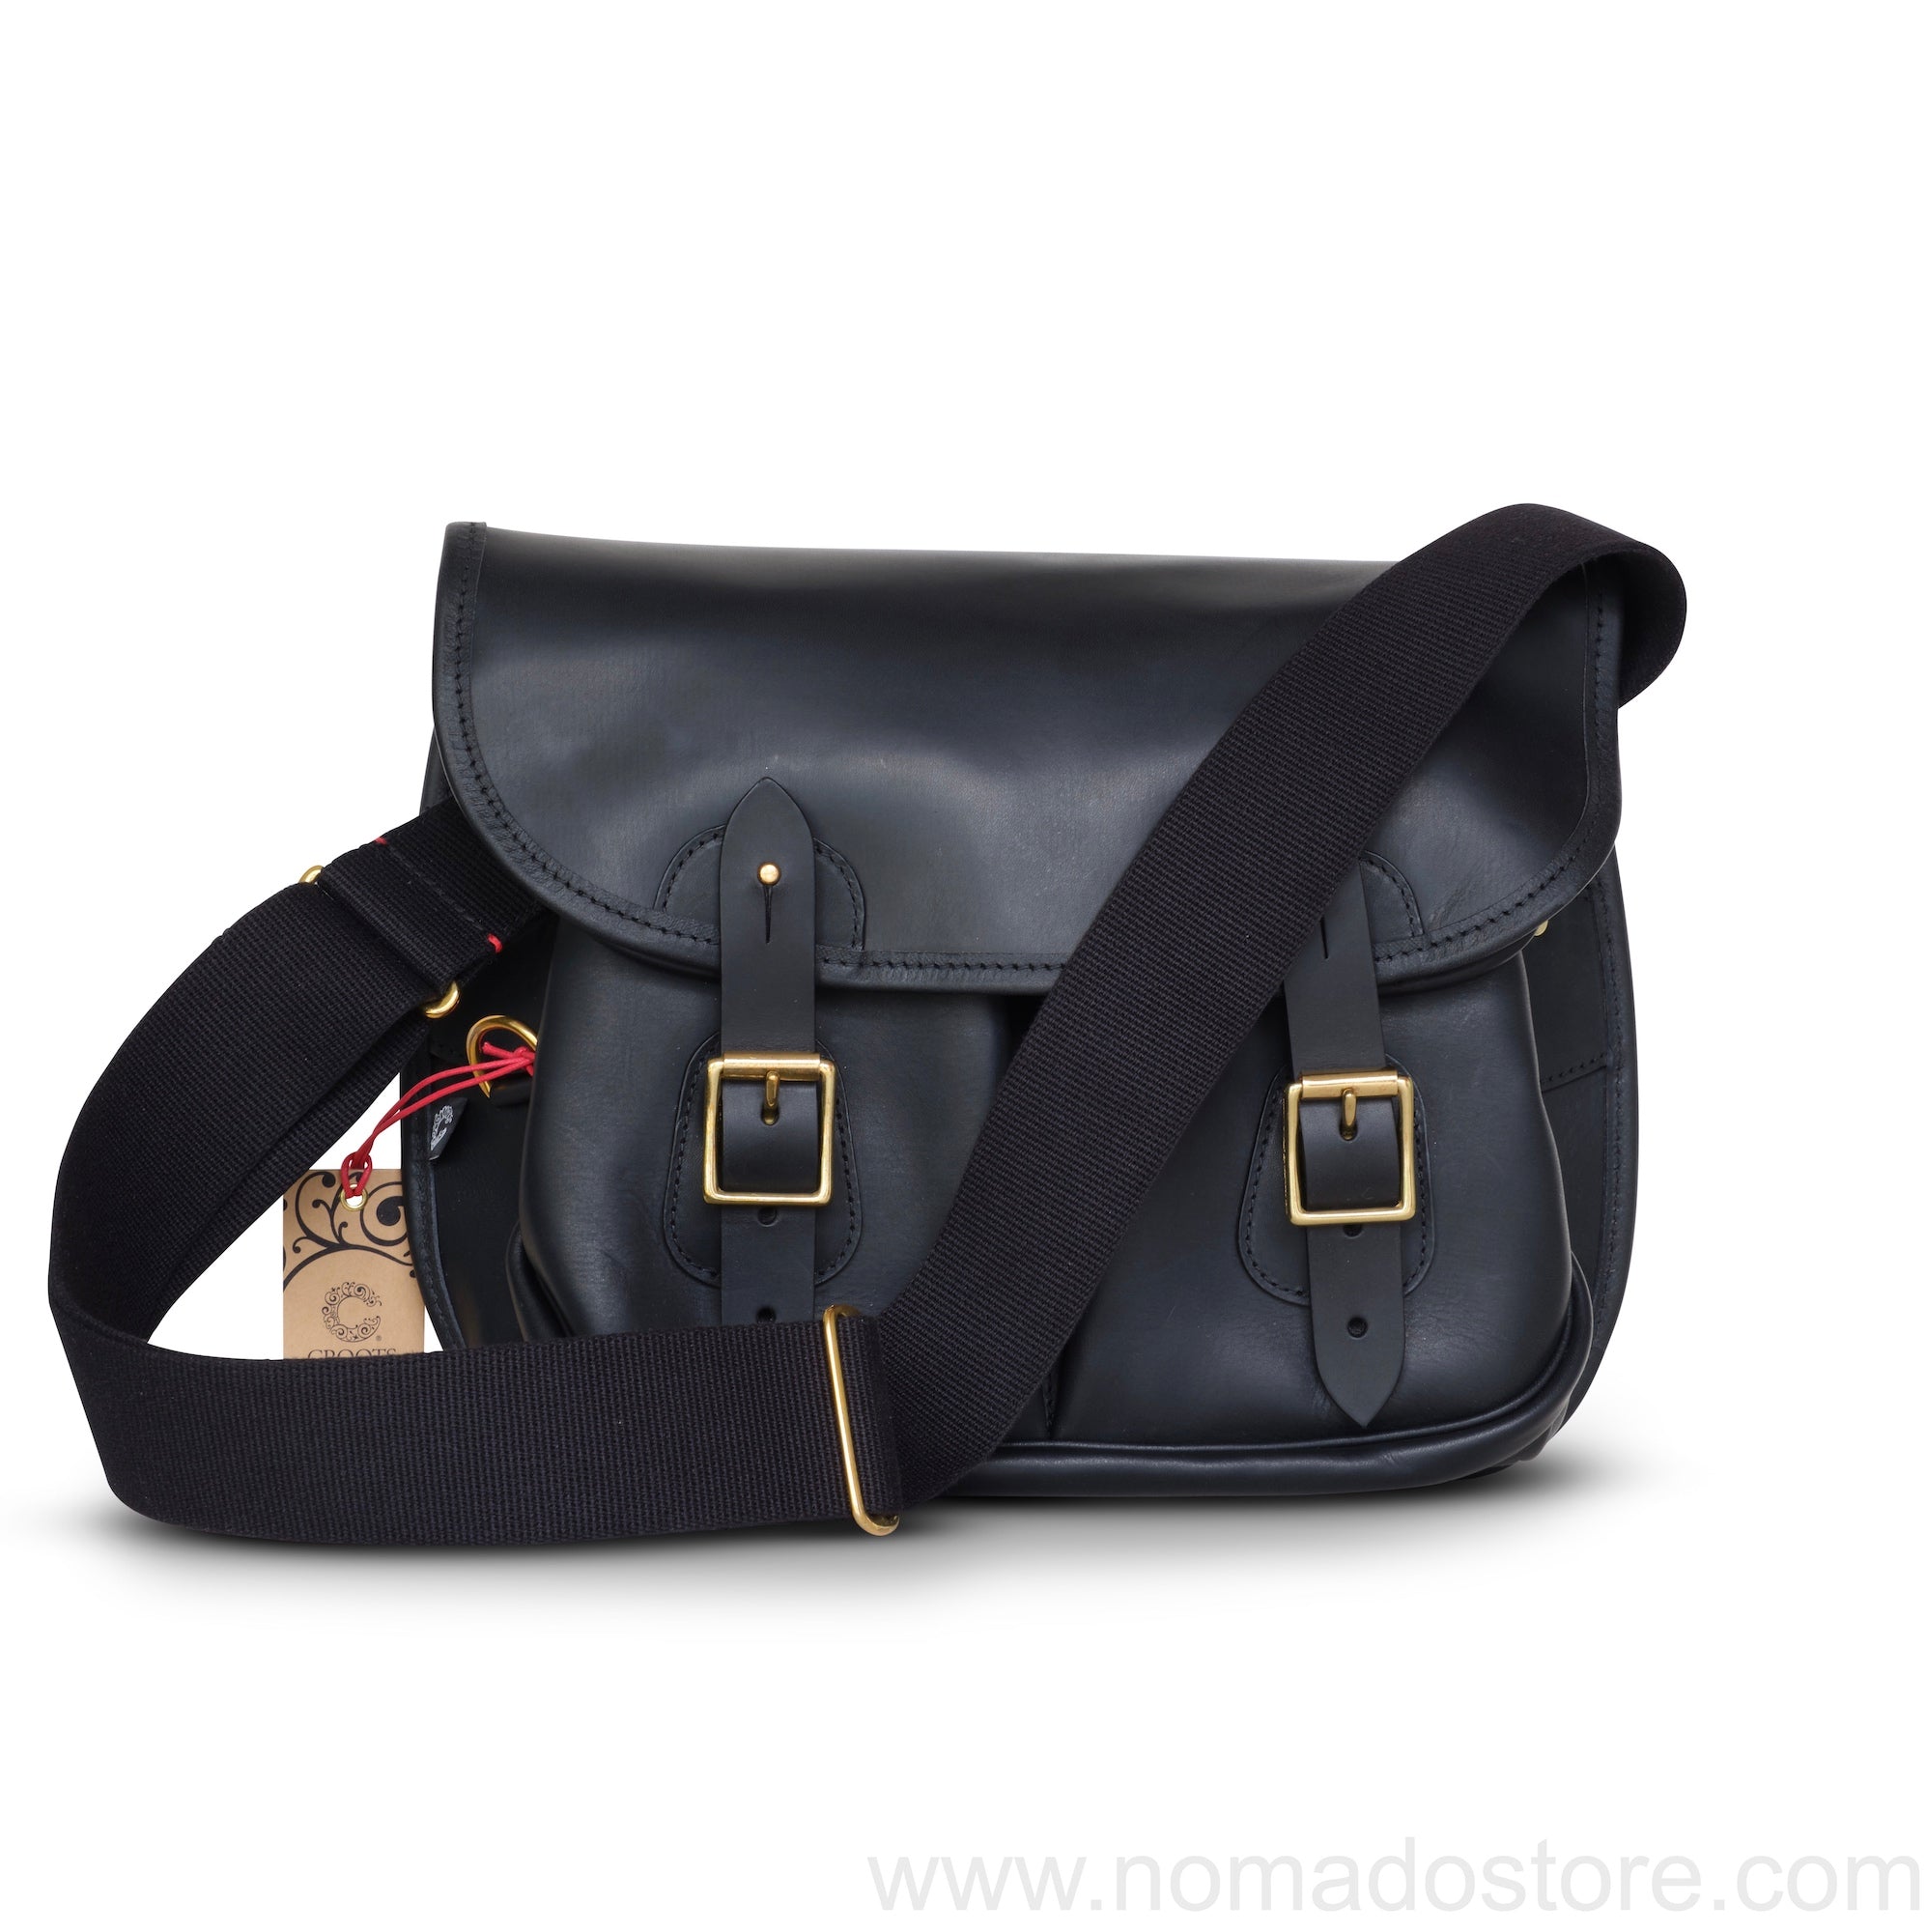 CROOTS DALBY VINTAGE LEATHER CARRYALL BAG (M) (Black) - NOMADO Store 